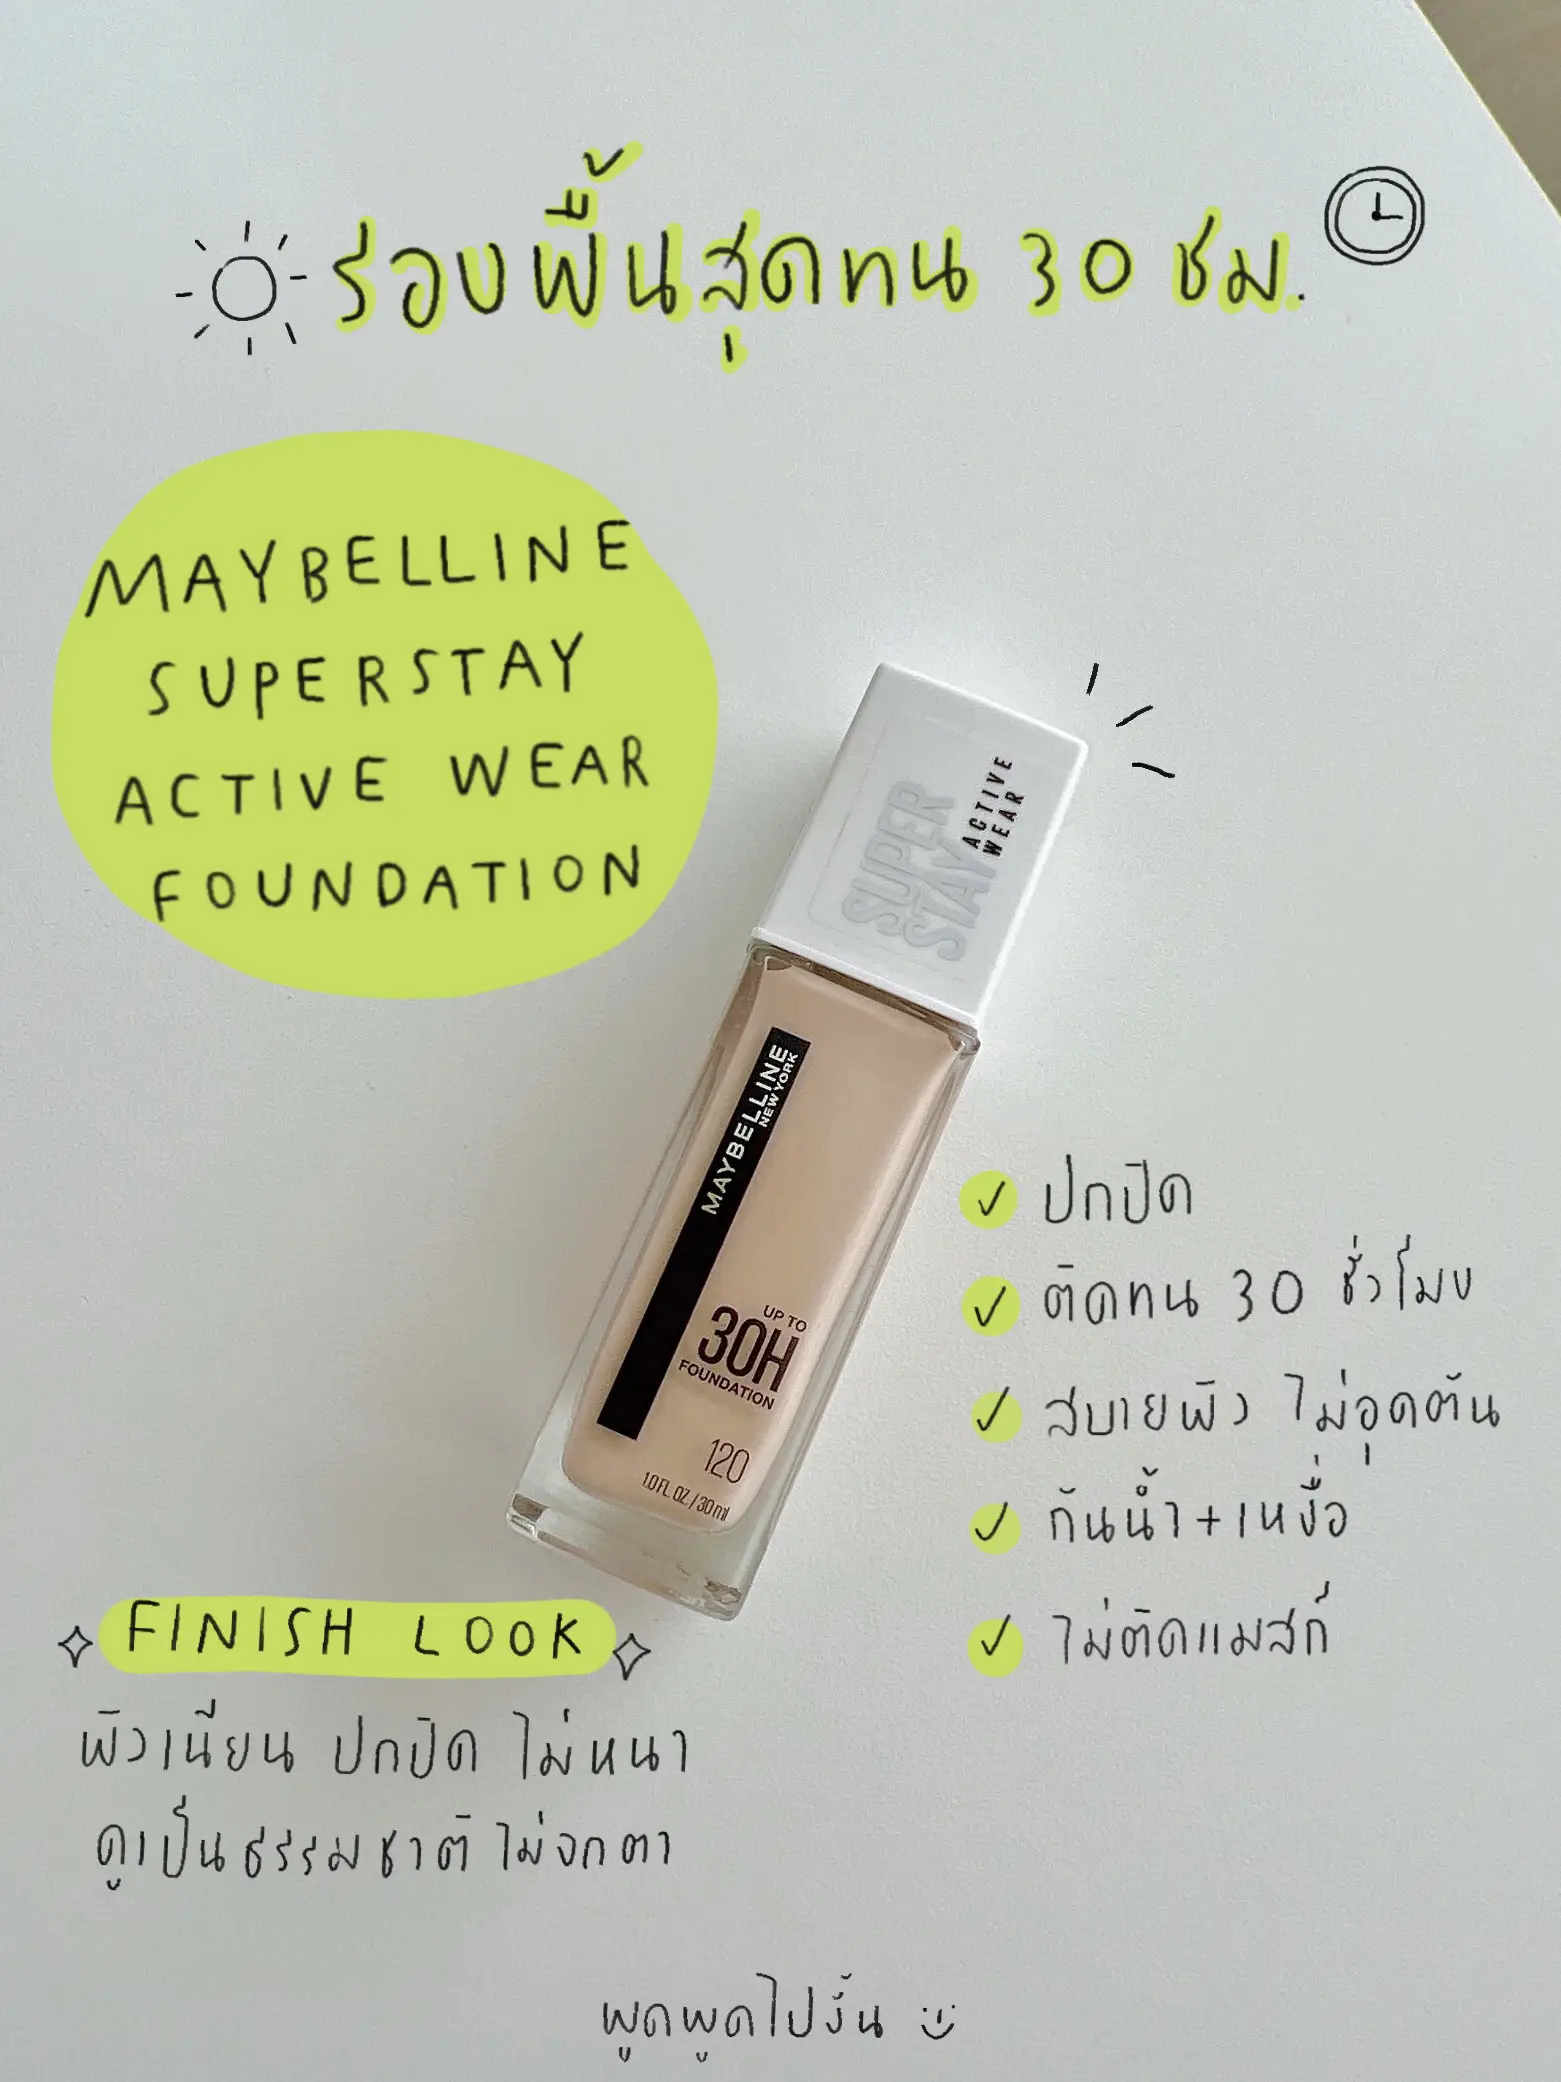 Maybelline New Foundation. Last up to 30 hours. | Gallery posted by  ployhomx | Lemon8 | Foundation